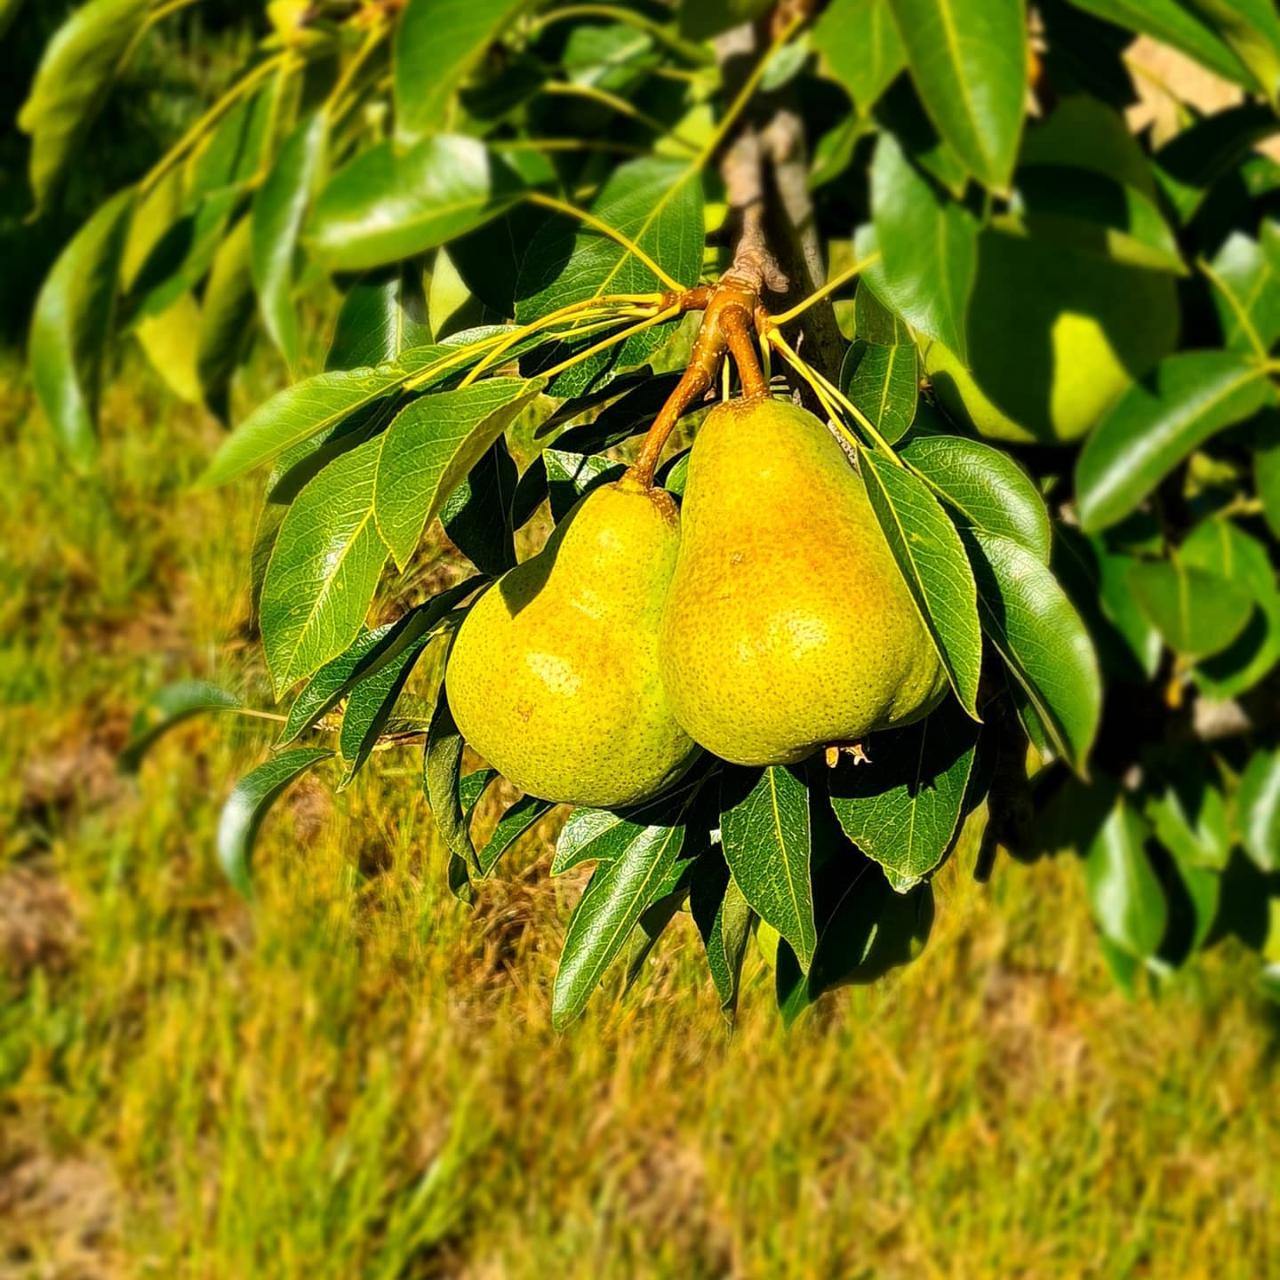 Pick Your Own Pears